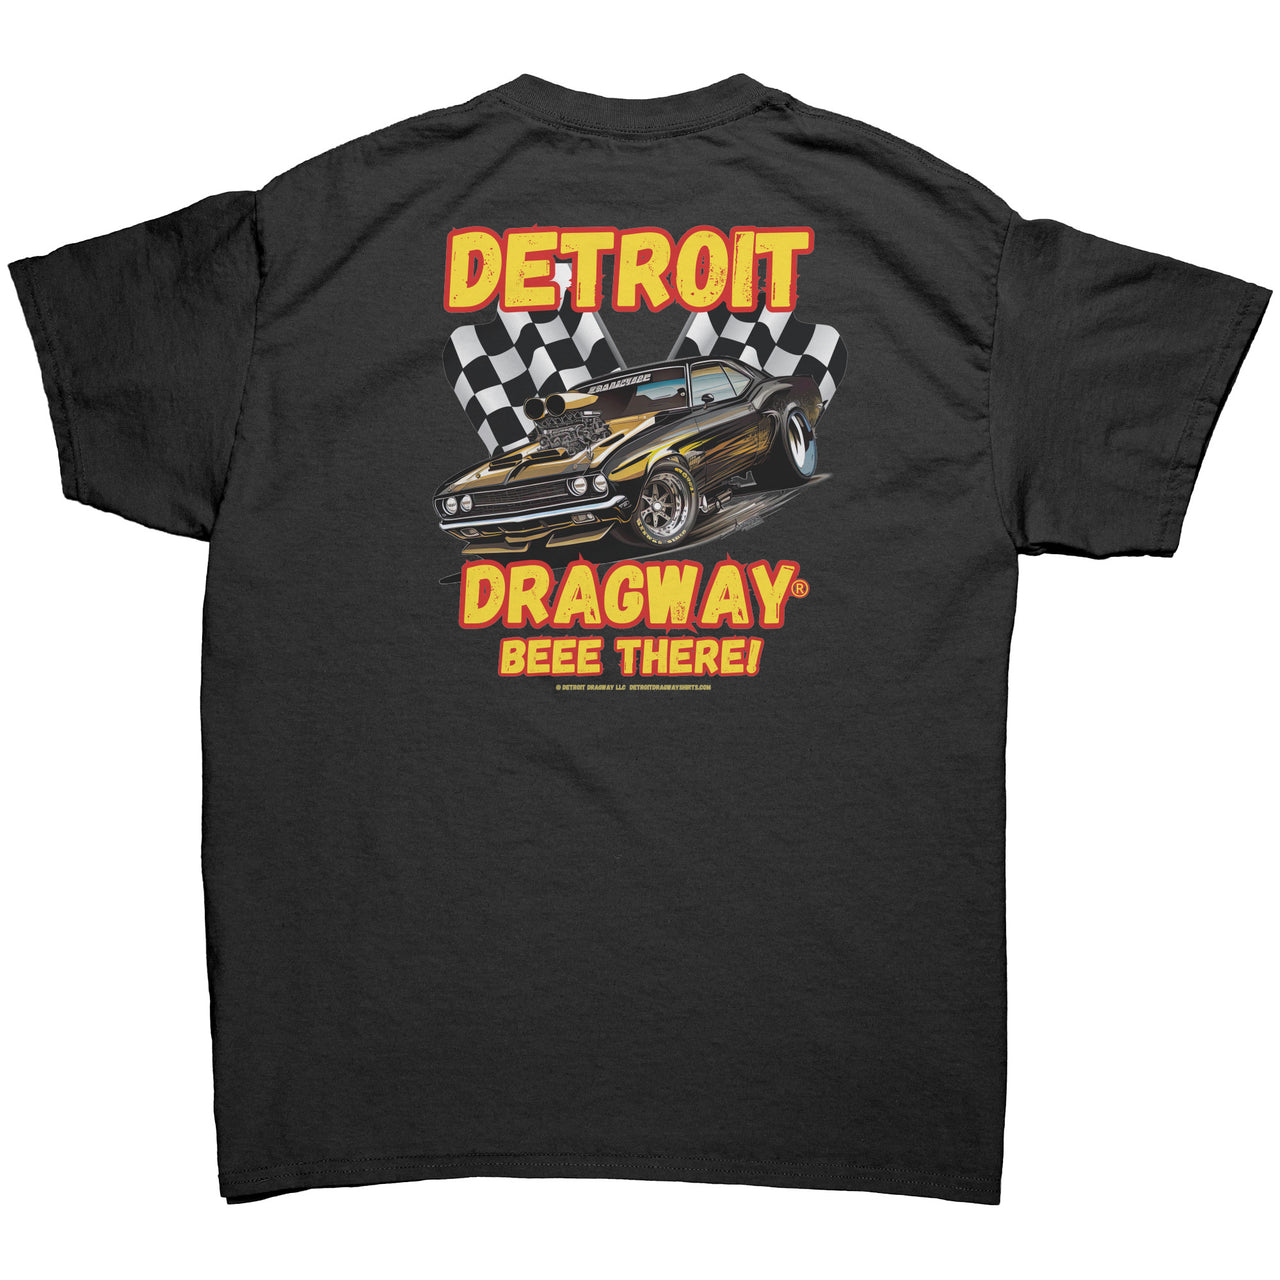 Detroit Dragway® BEEE THERE ver 2 Image on Back Mens Shirt